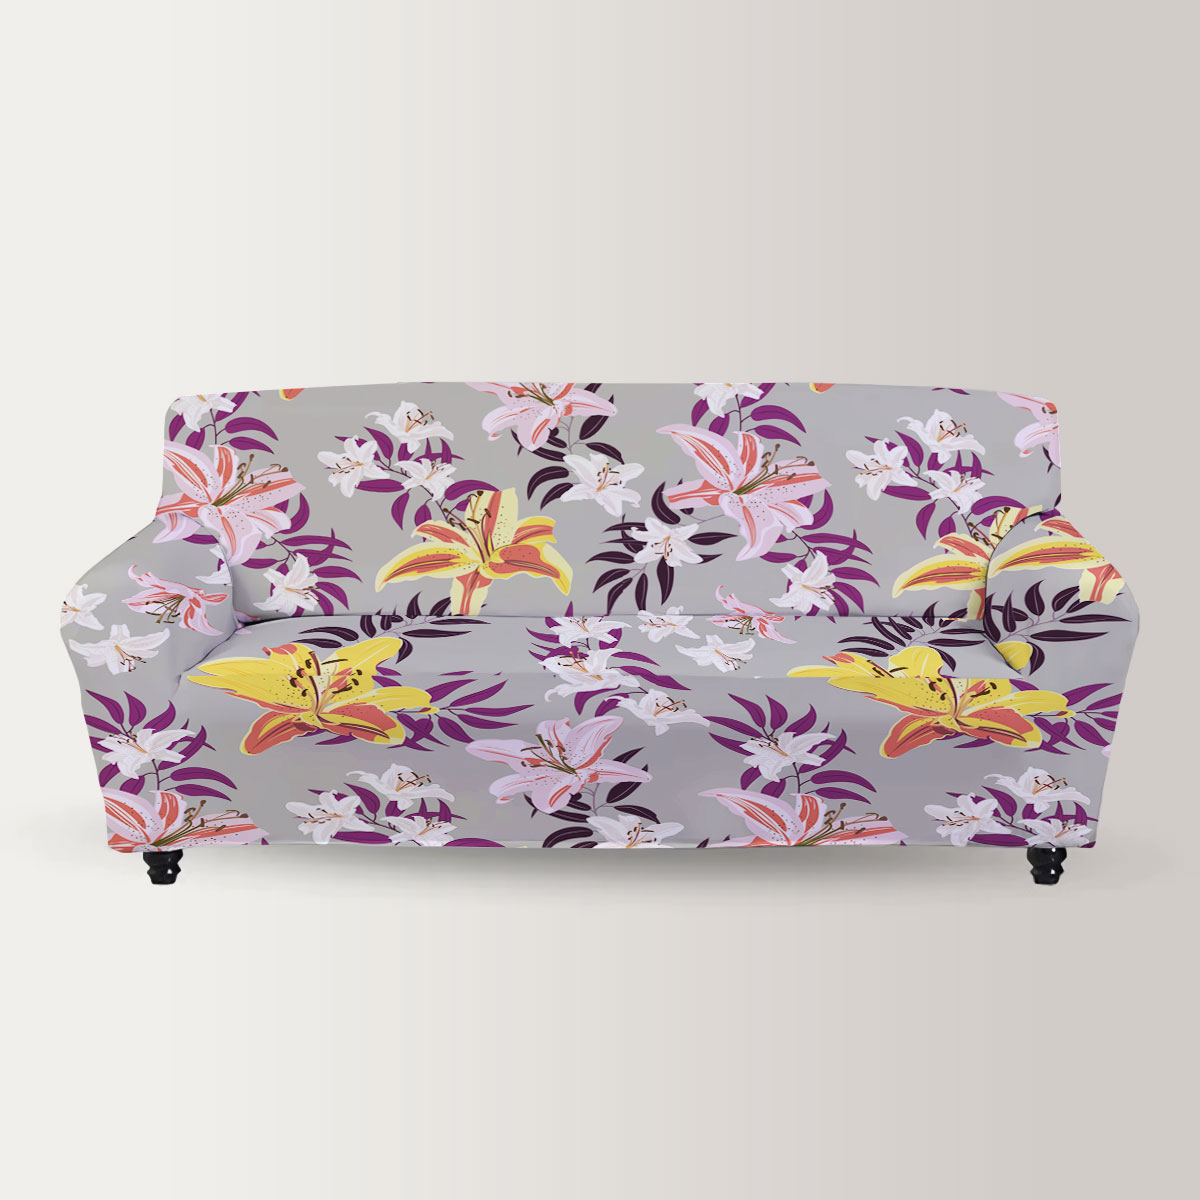 Vintage Lily Flower On Gray Background Sofa Cover